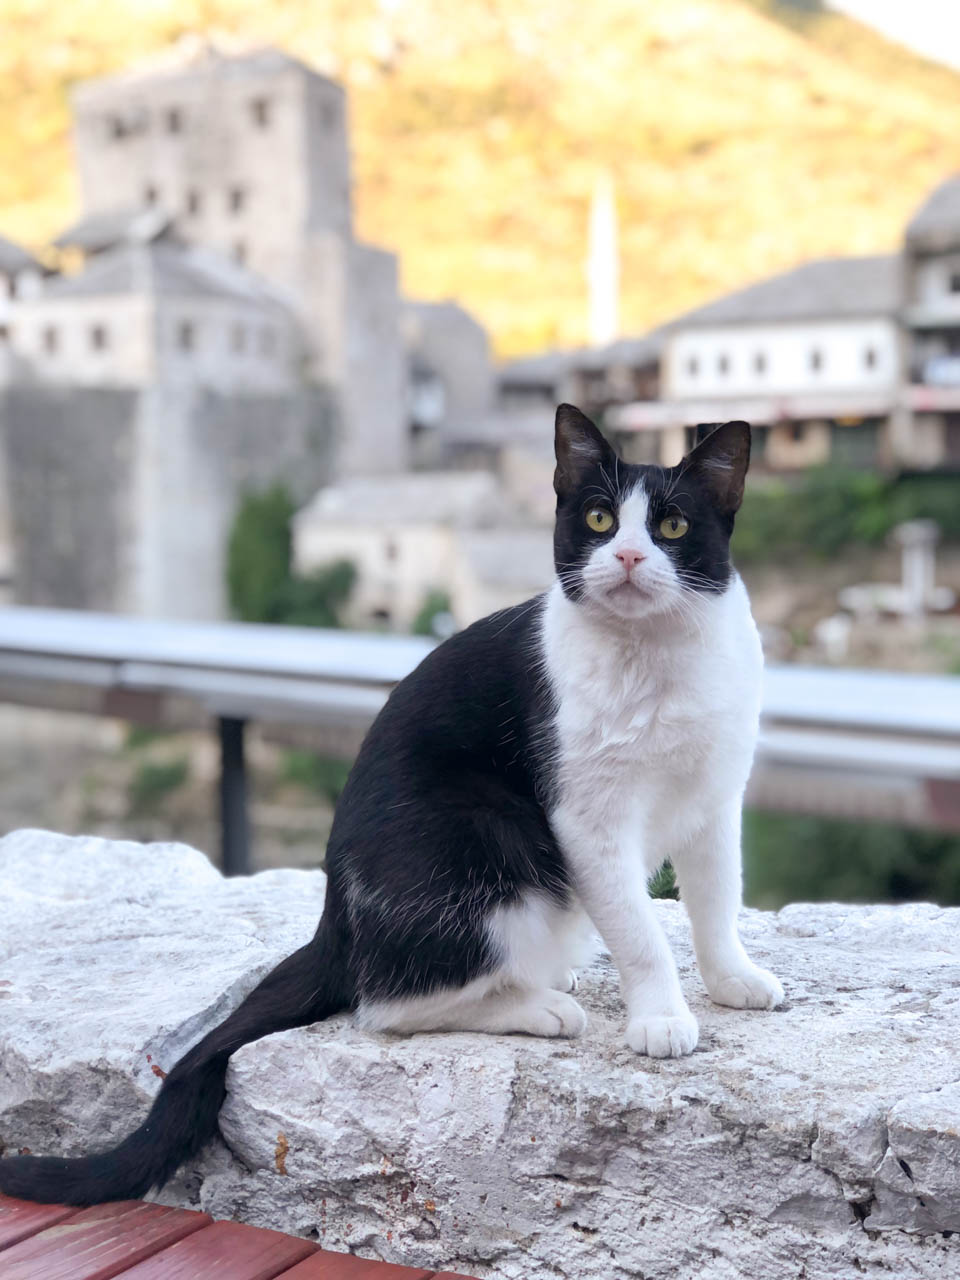 A black and white cat sitting on top of a stone wall looking at the camera